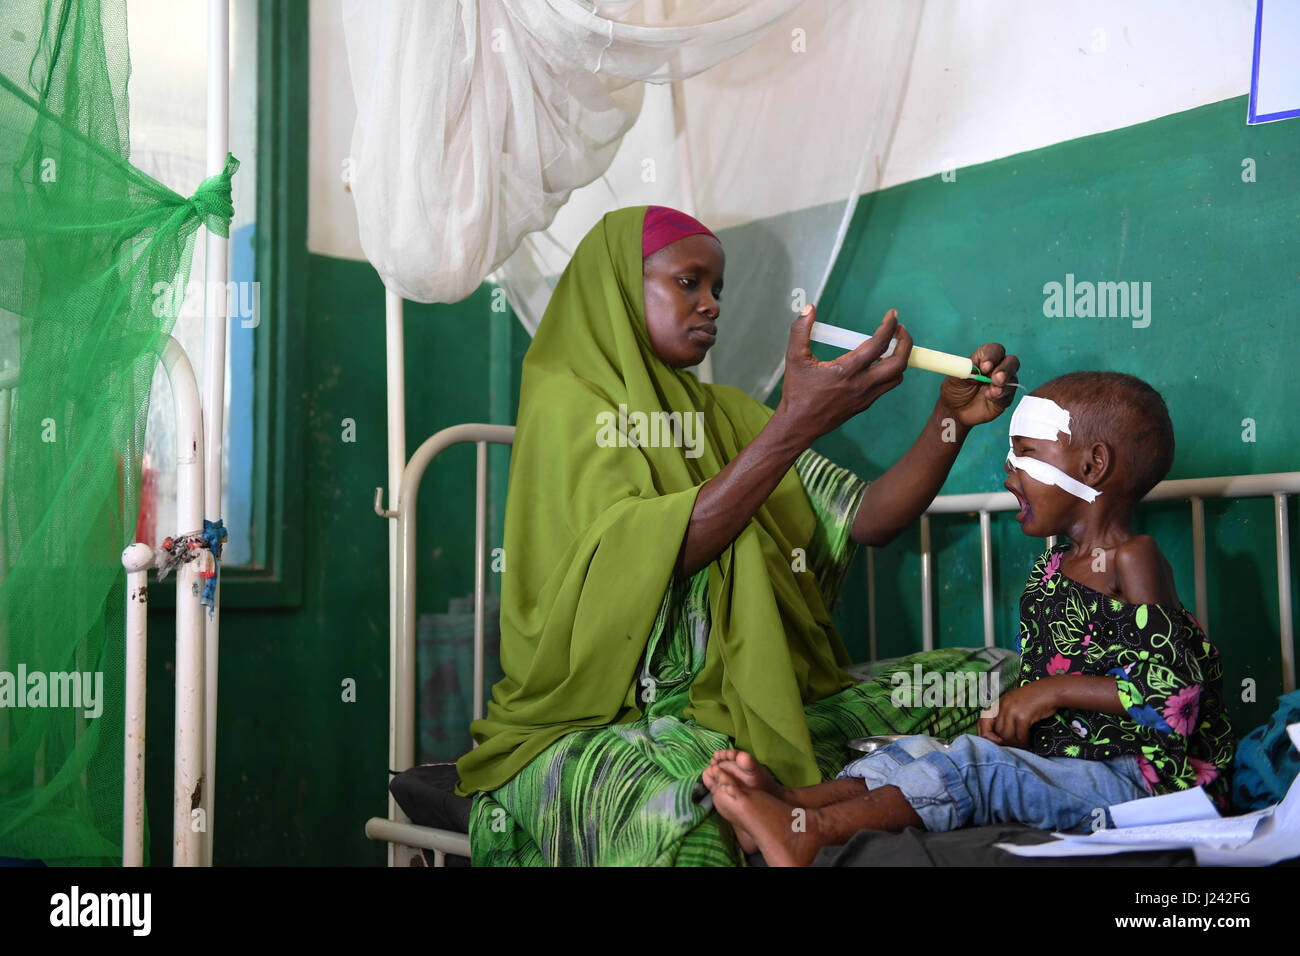 A Somalia women feeds her malnourished child fitted with a nasogastric tube inside a ward dedicated for diarrhea patients at the Banadir hospital March 9, 2017 in Mogadishu, Somalia. Somalia is experiencing a severe drought, and may be on the brink of famine unless urgent humanitarian action is taken soon. Stock Photo